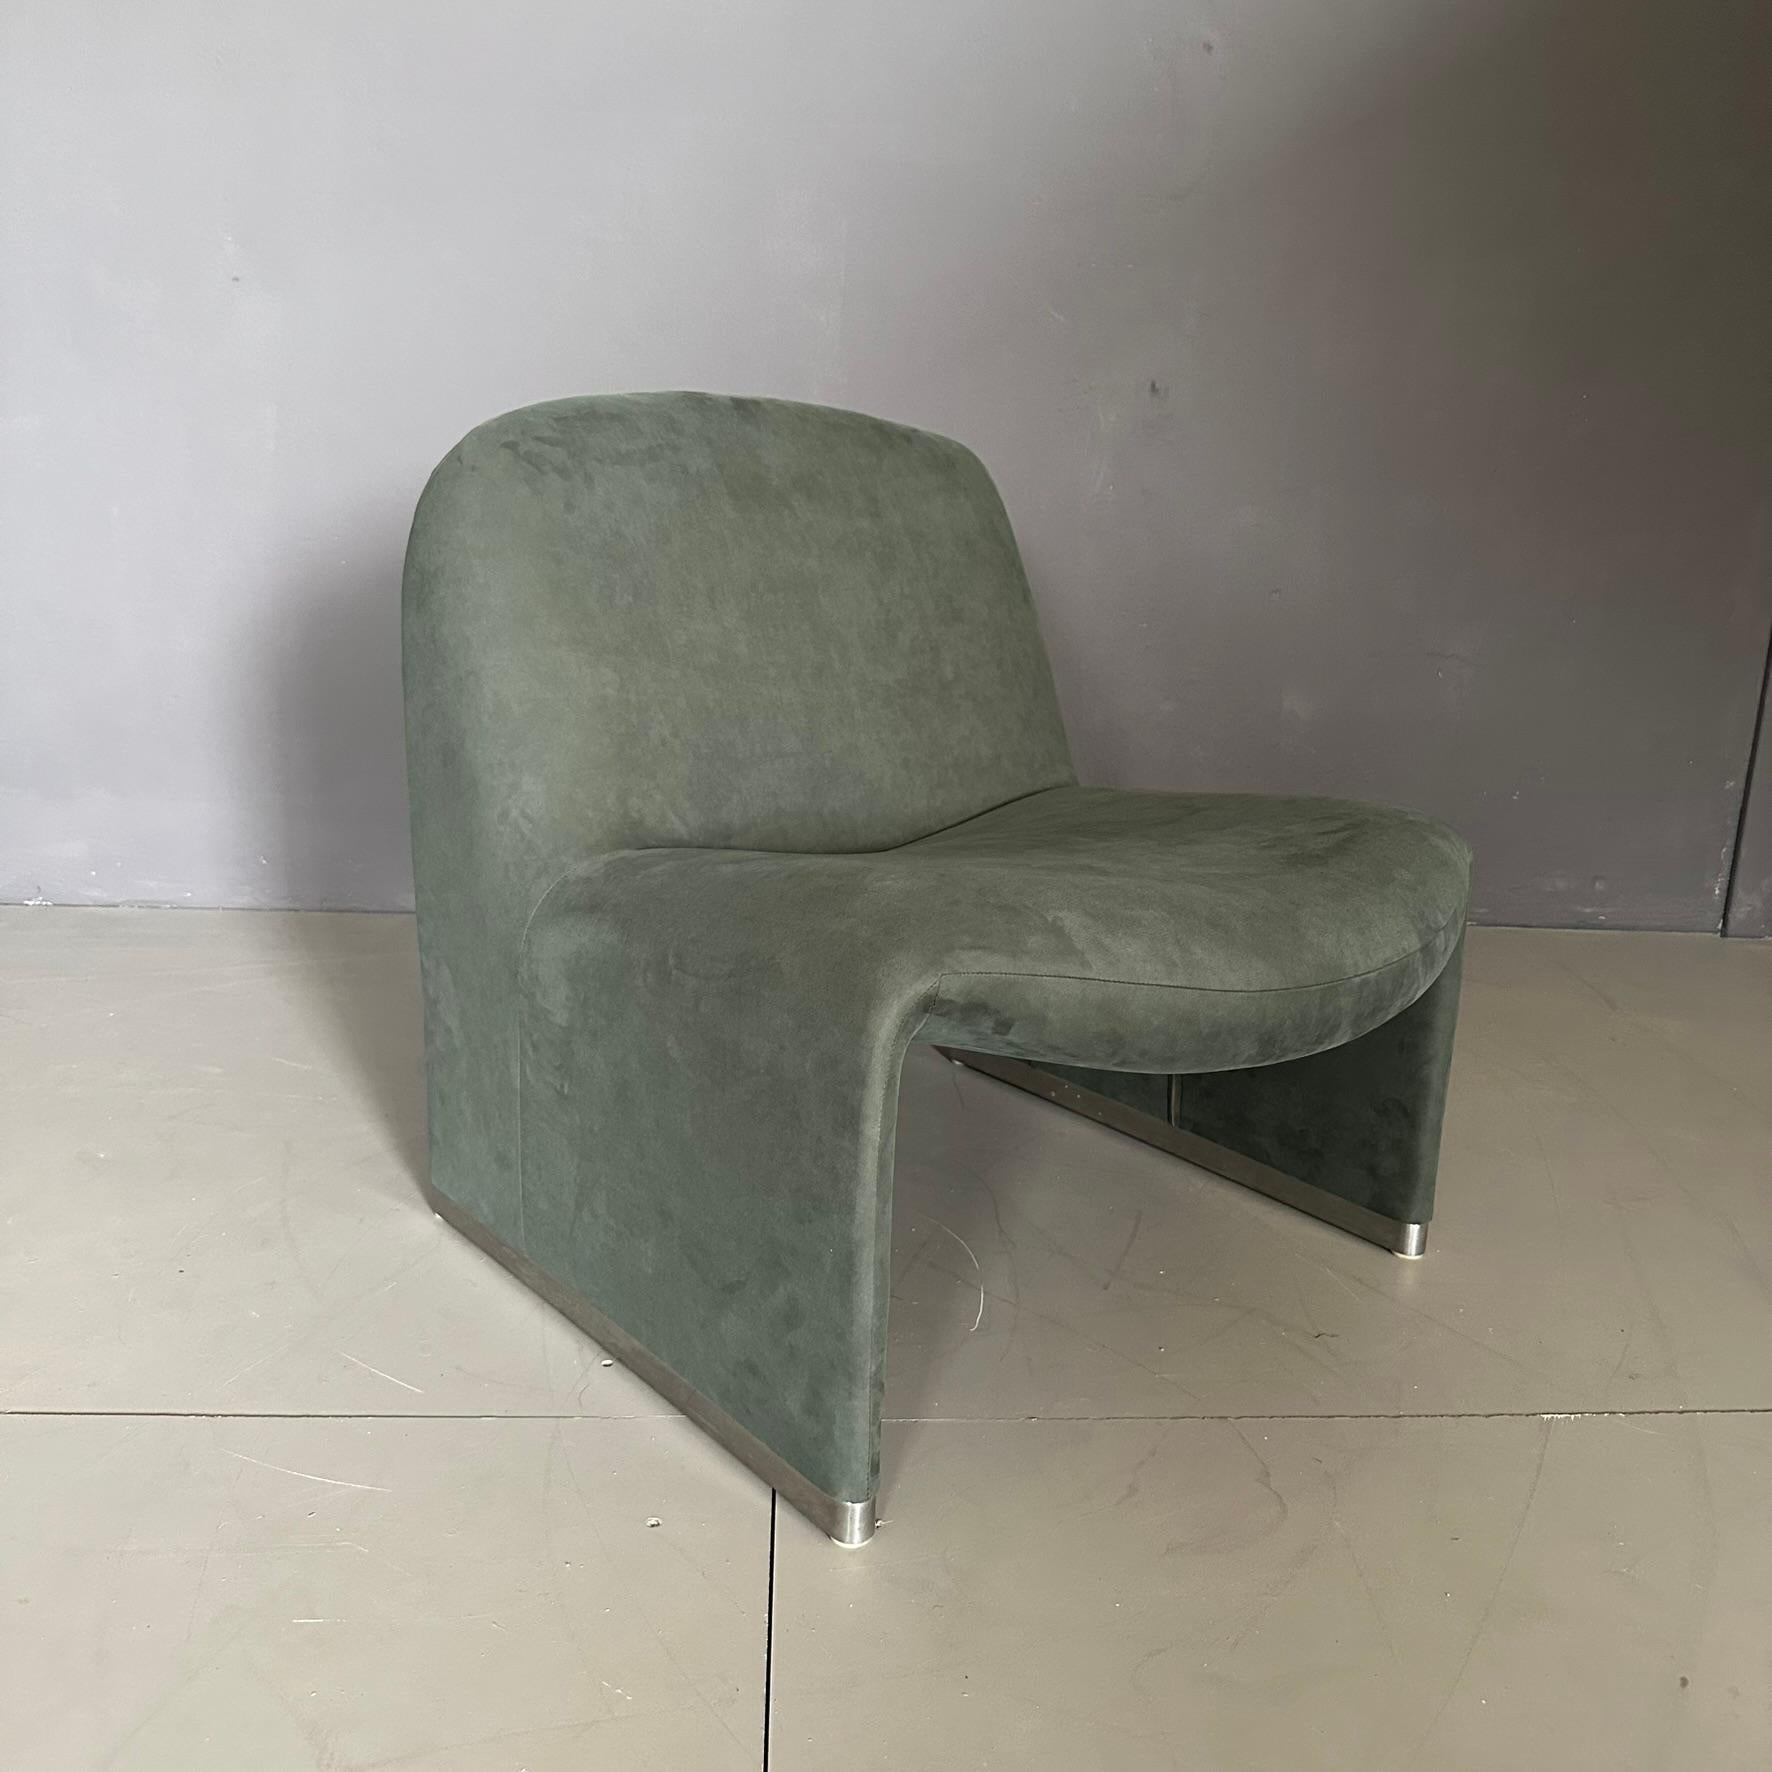 Alki armchair, design by Giancarlo Piretti for Anonima Castelli, 1970s, Italian manufacture.
The armchair made with a metal structure and covered with sage green elastic fabric.
Design with soft and enveloping lines. The upholstery fabric is new.
1